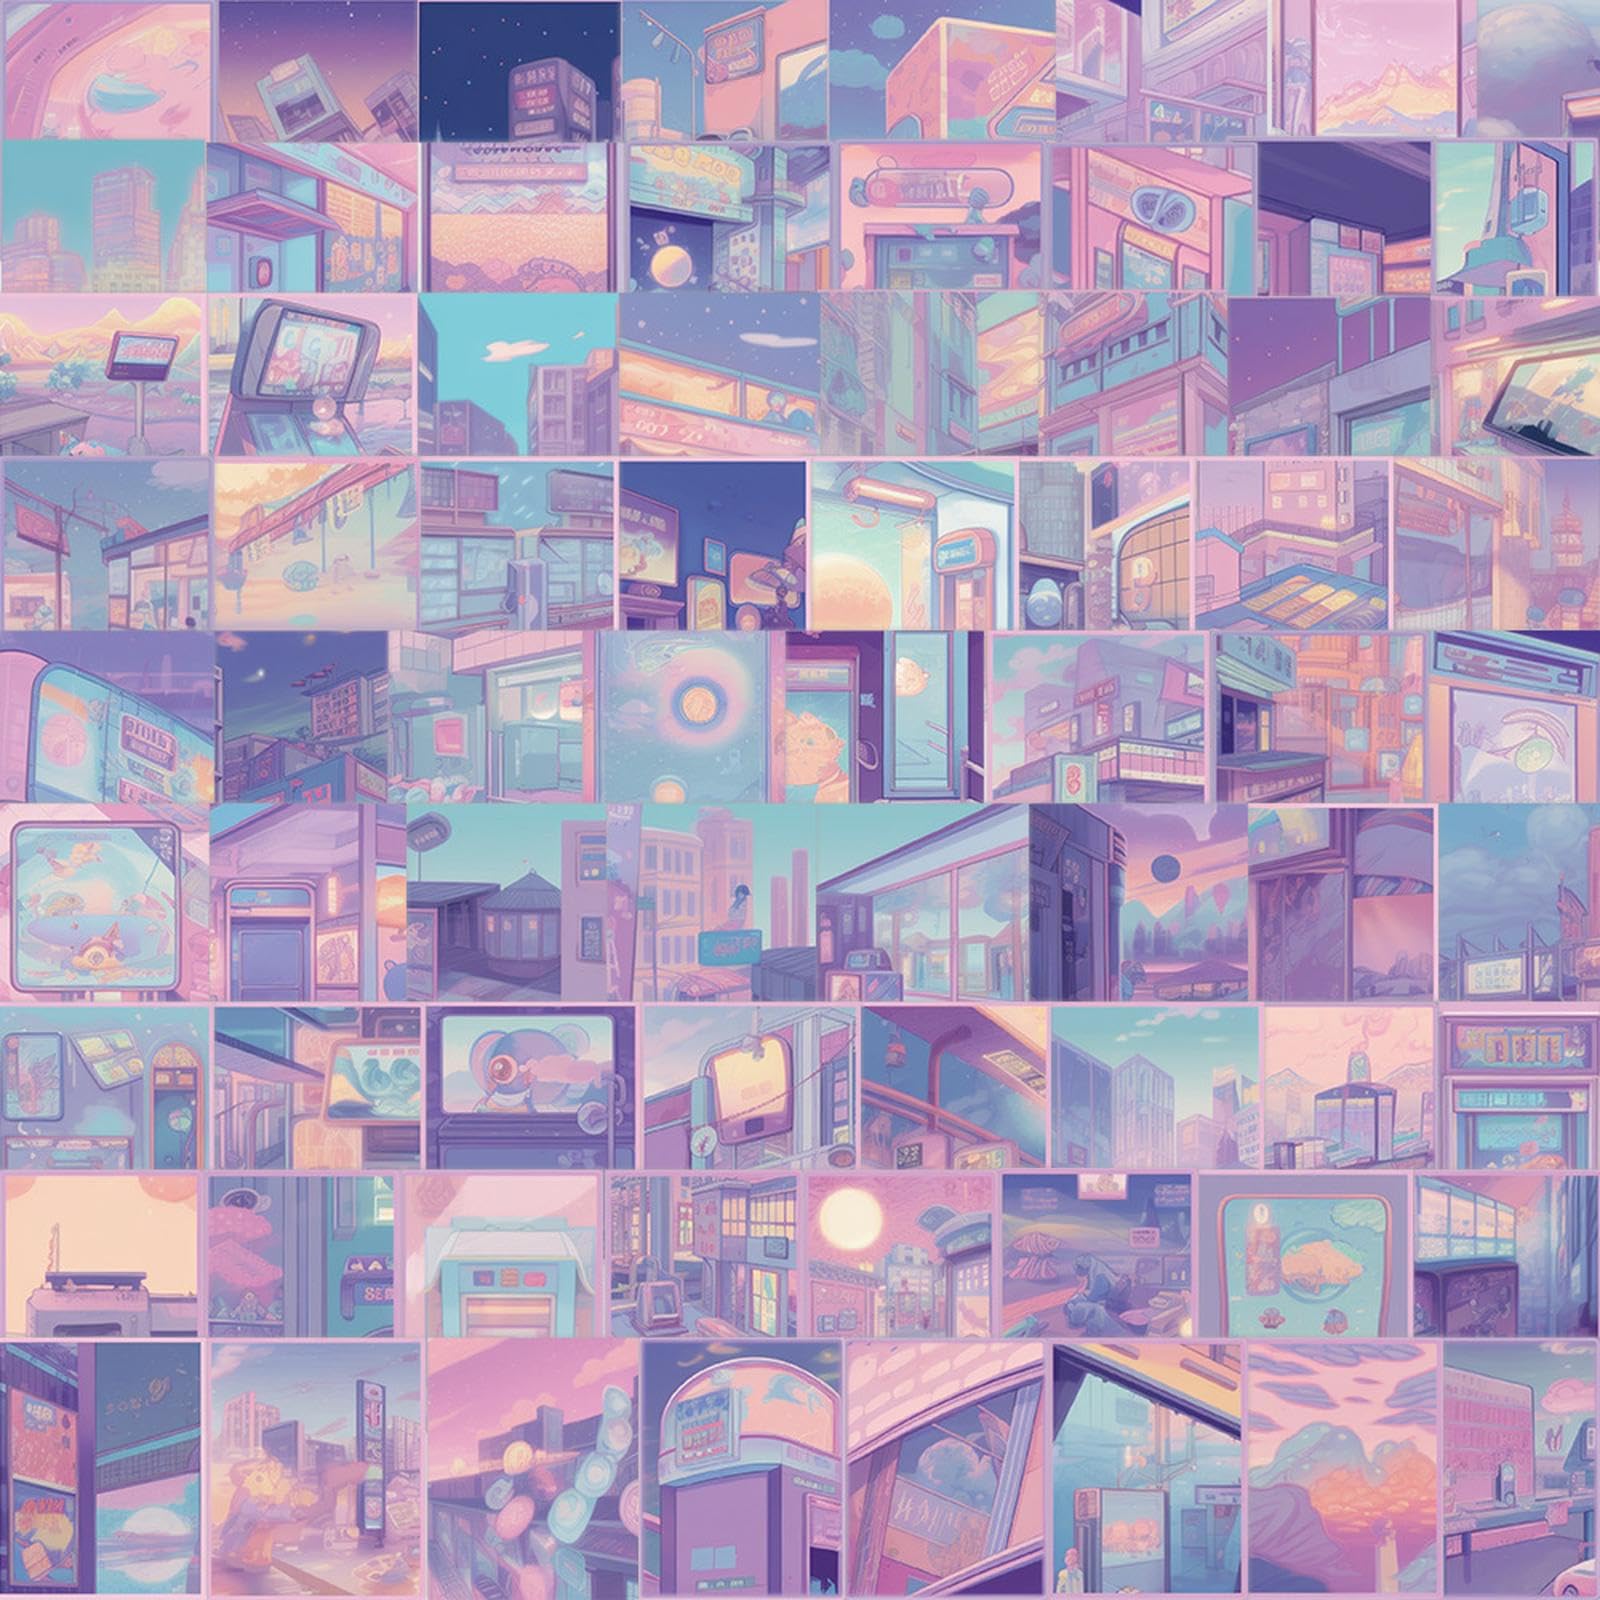 A digital collage of a cityscape in a pastel purple, blue, and pink color scheme. - Anime landscape